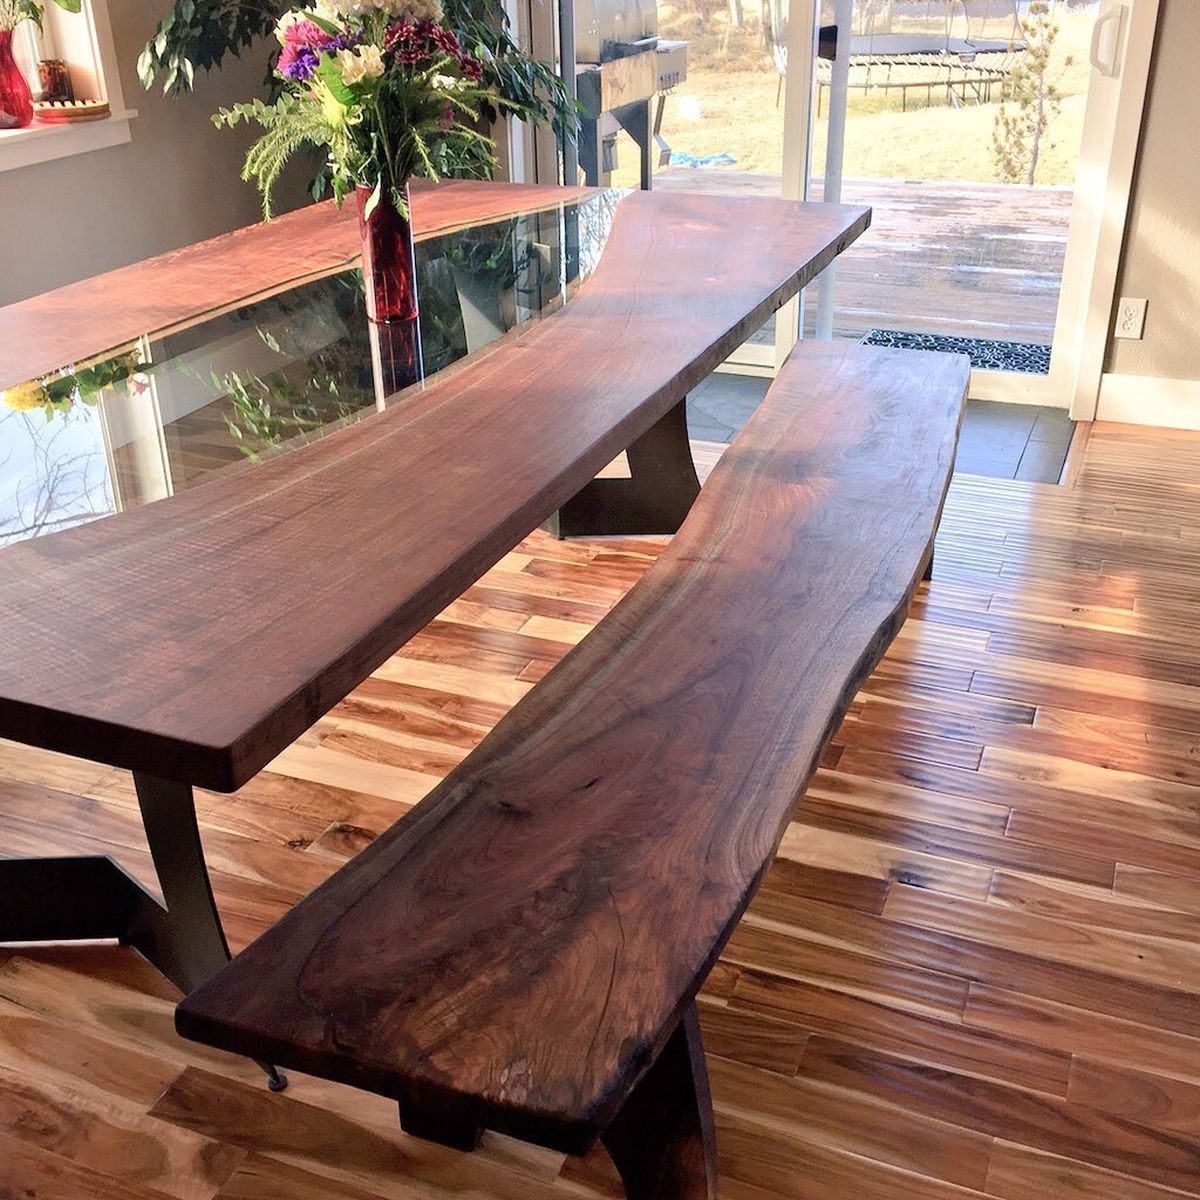 Live-edge-and-glass-dining-table-is-a-must-try-offbeat-additing-in-the-dining-space-41645